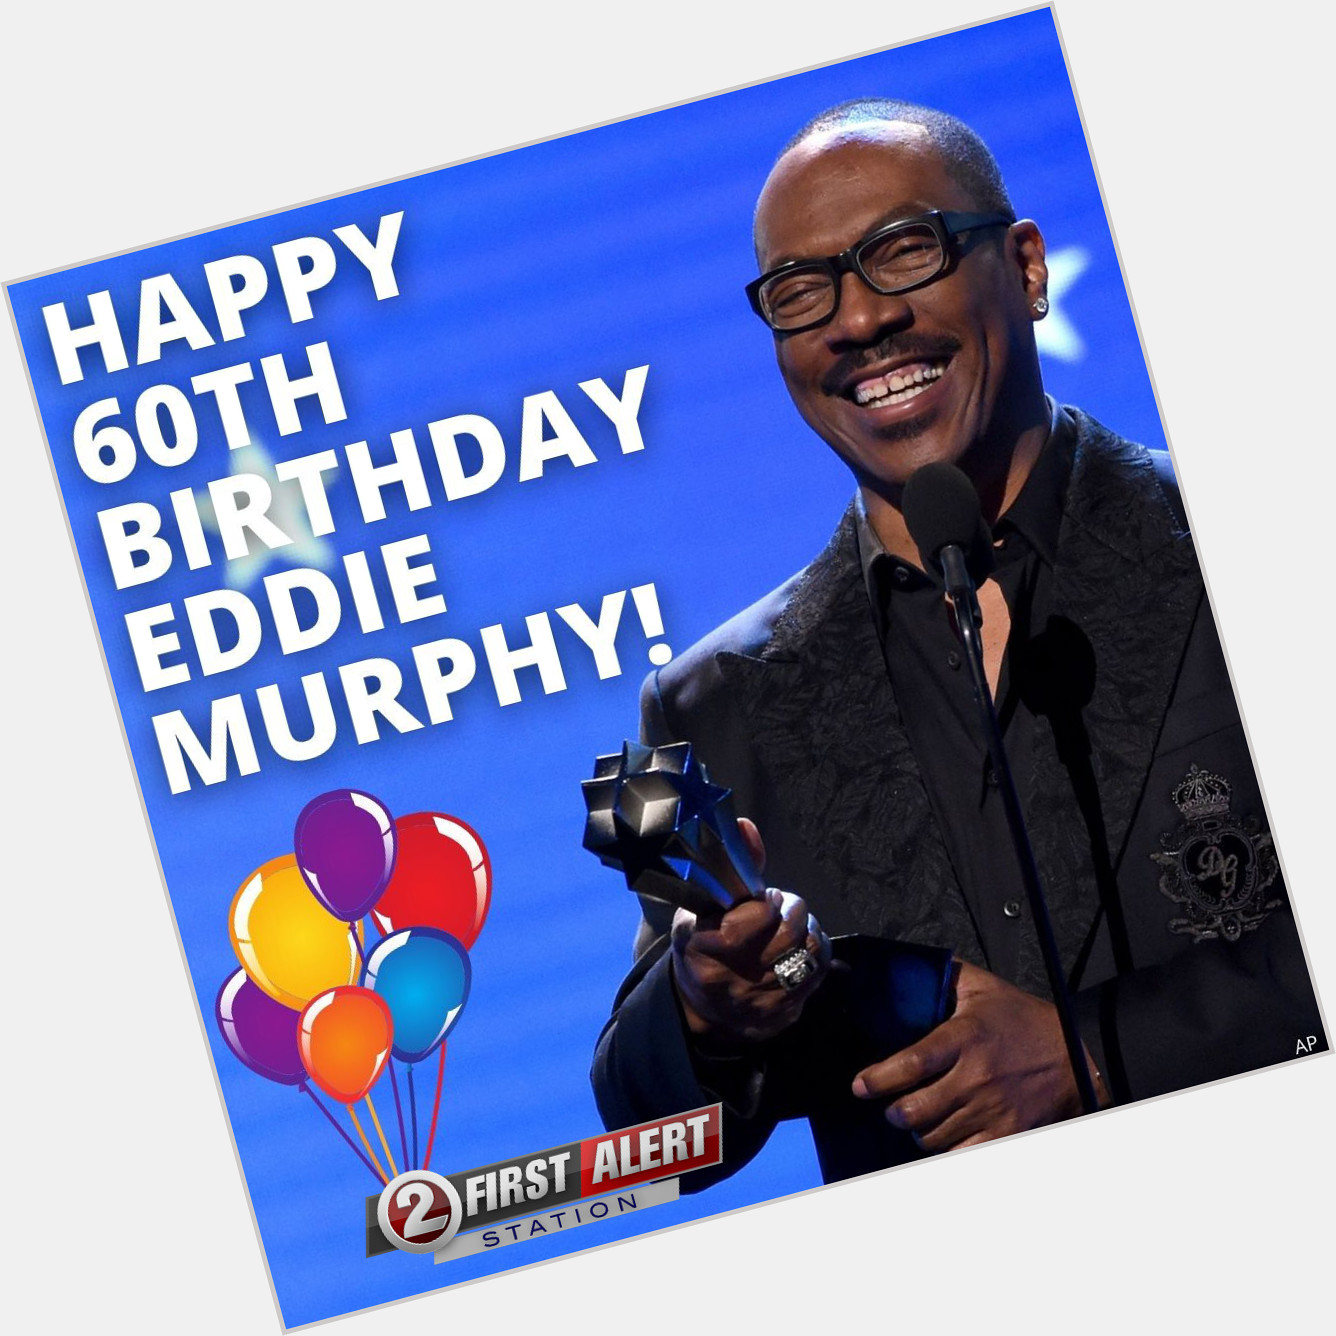 Happy 60th Birthday to Eddie Murphy!  Which one of his roles is your favorite? 